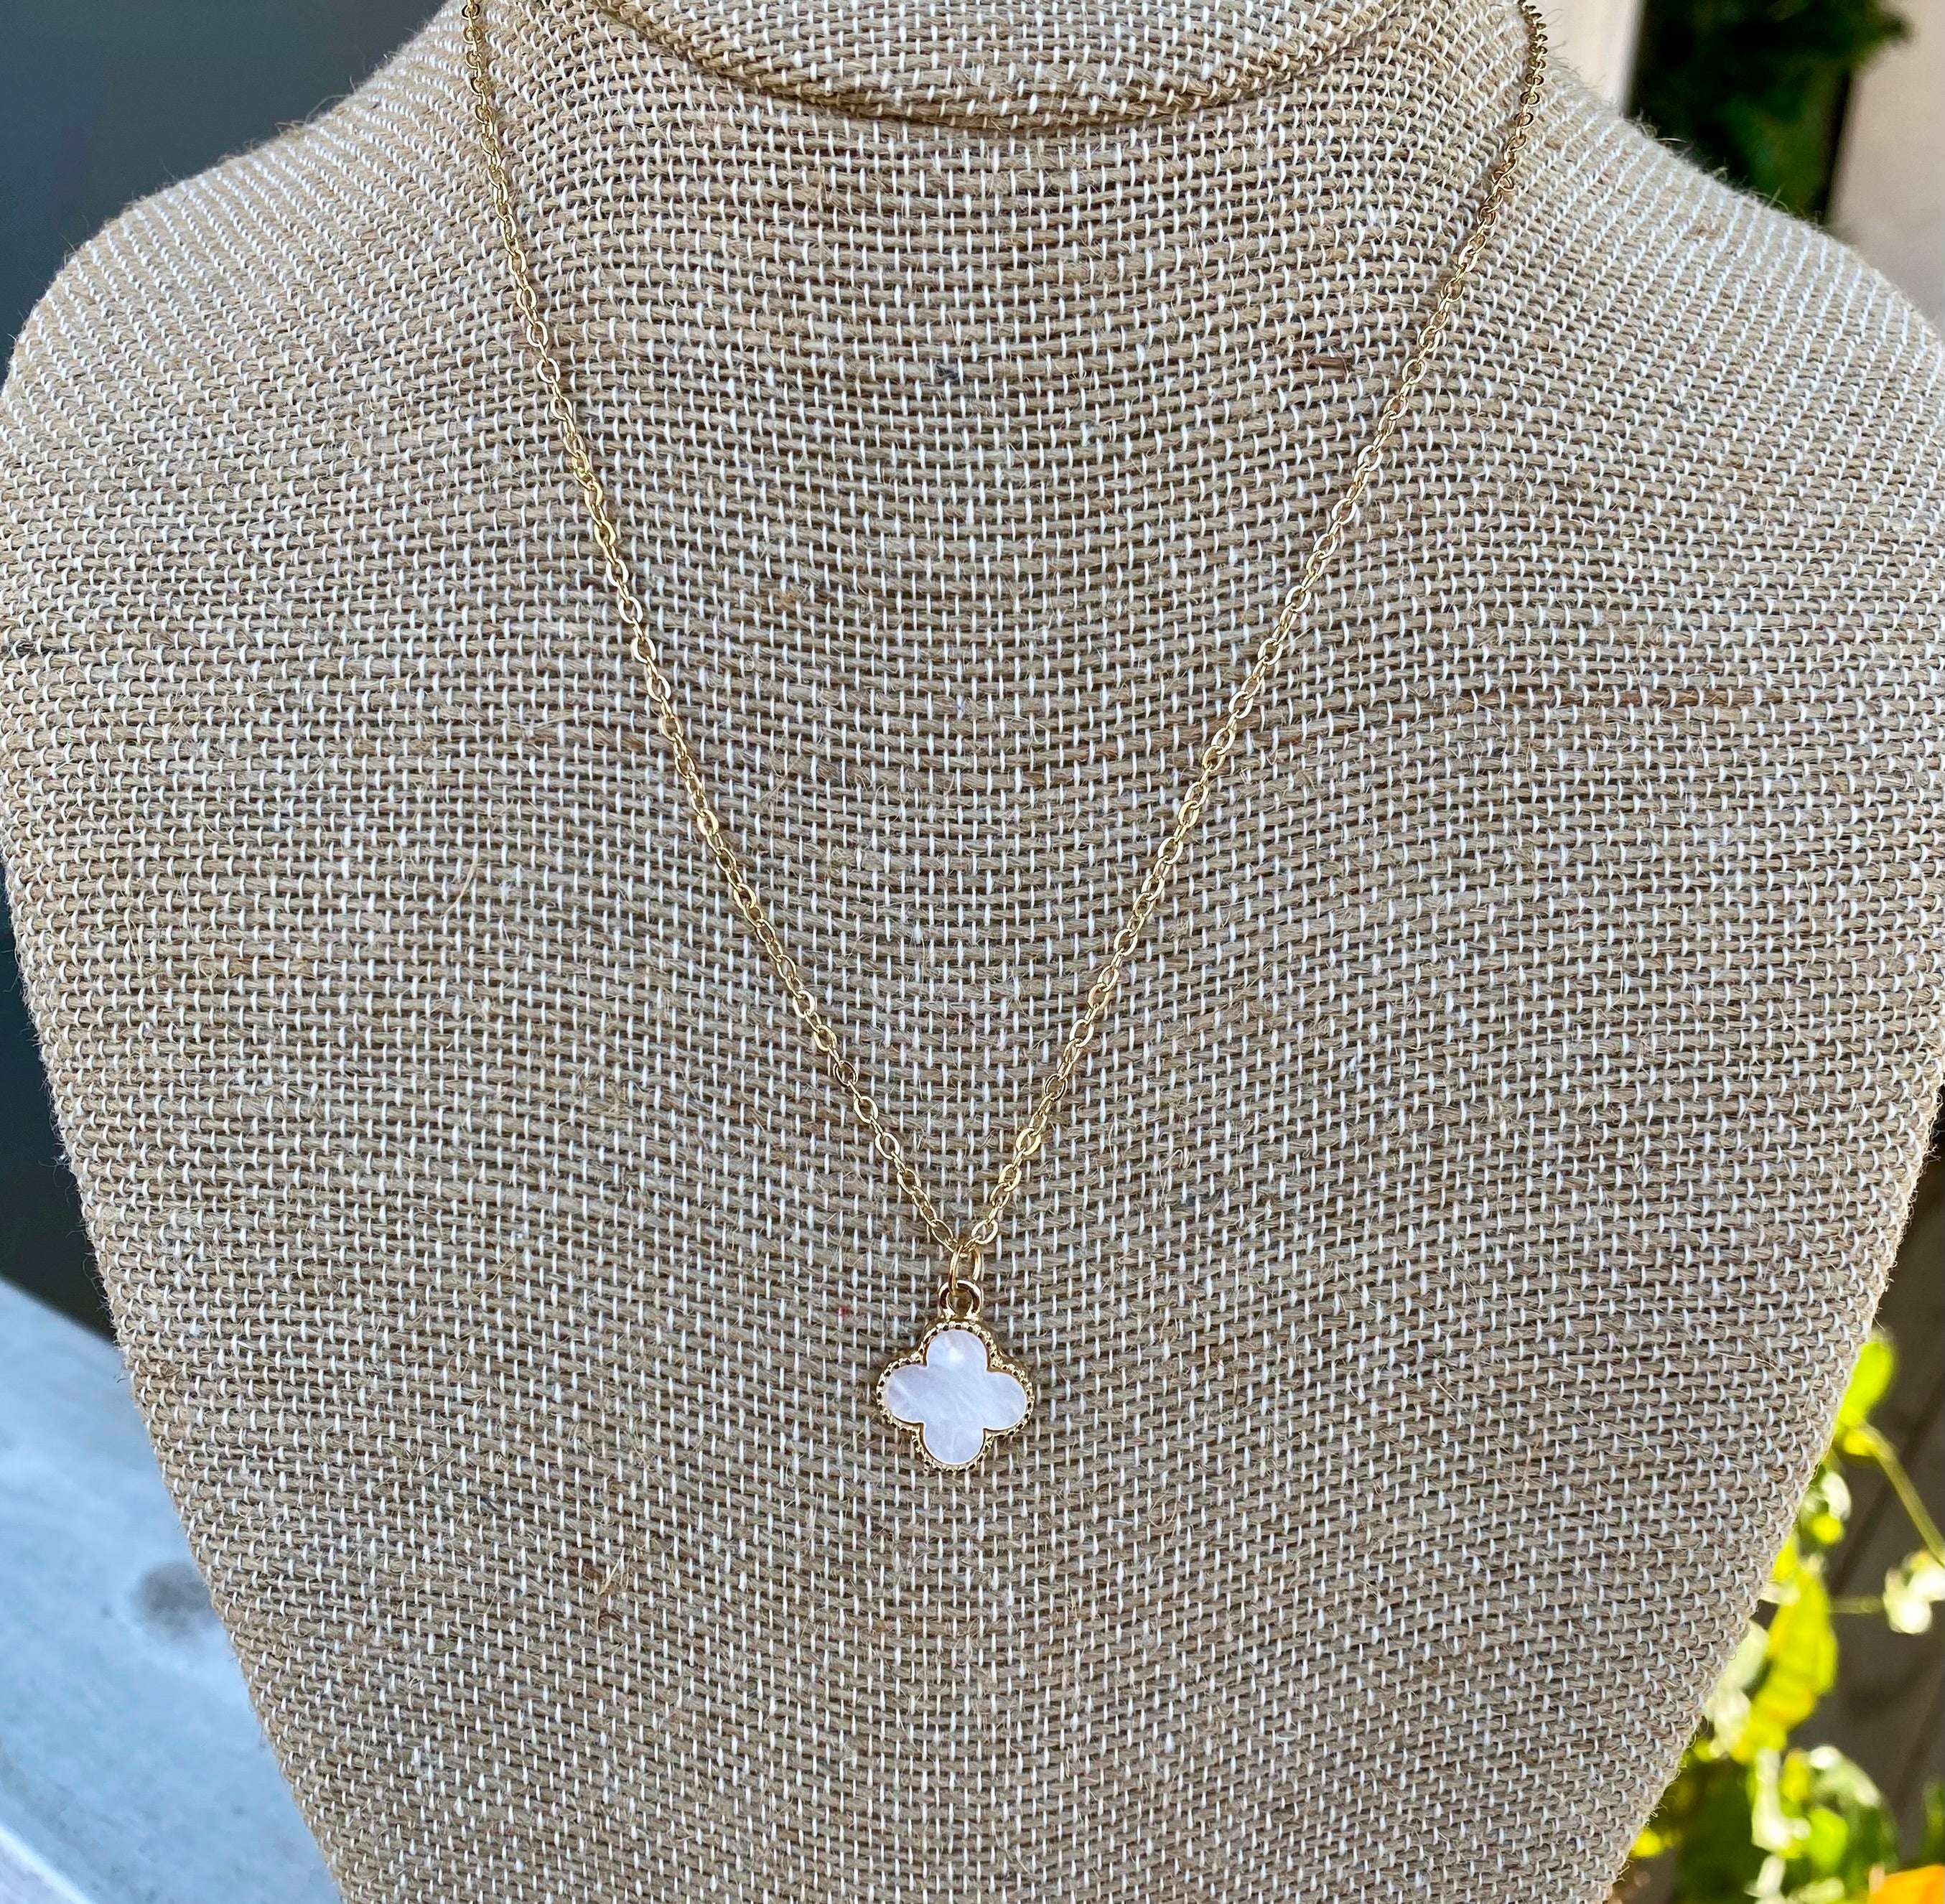 Gold Necklace with Clover Shaped Pendant